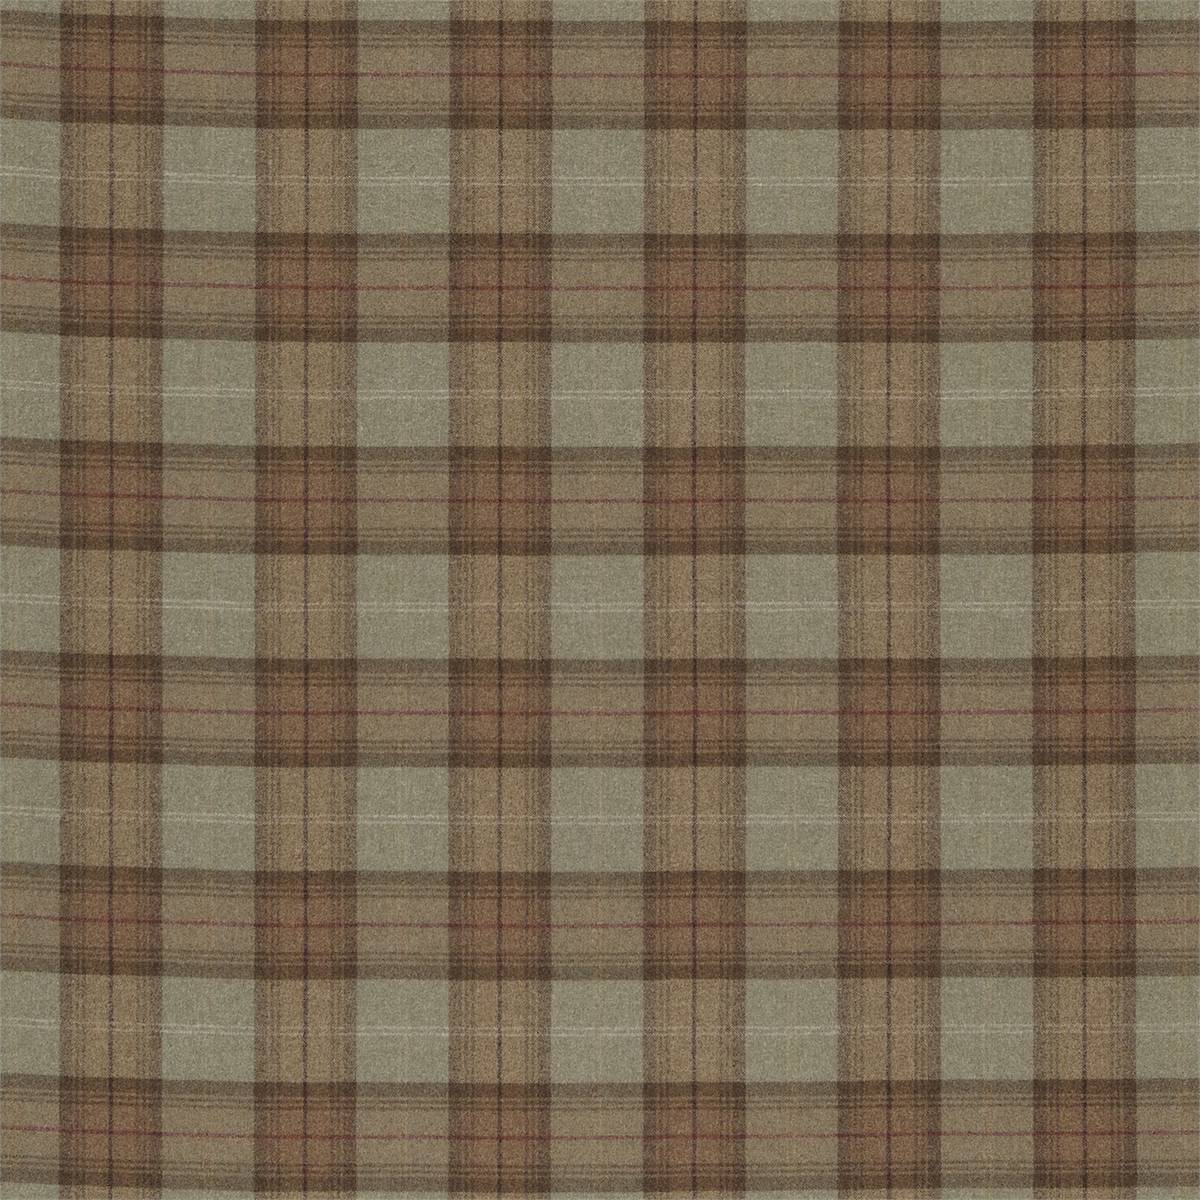 Woodford Plaid Loden/Olive Fabric by William Morris & Co.